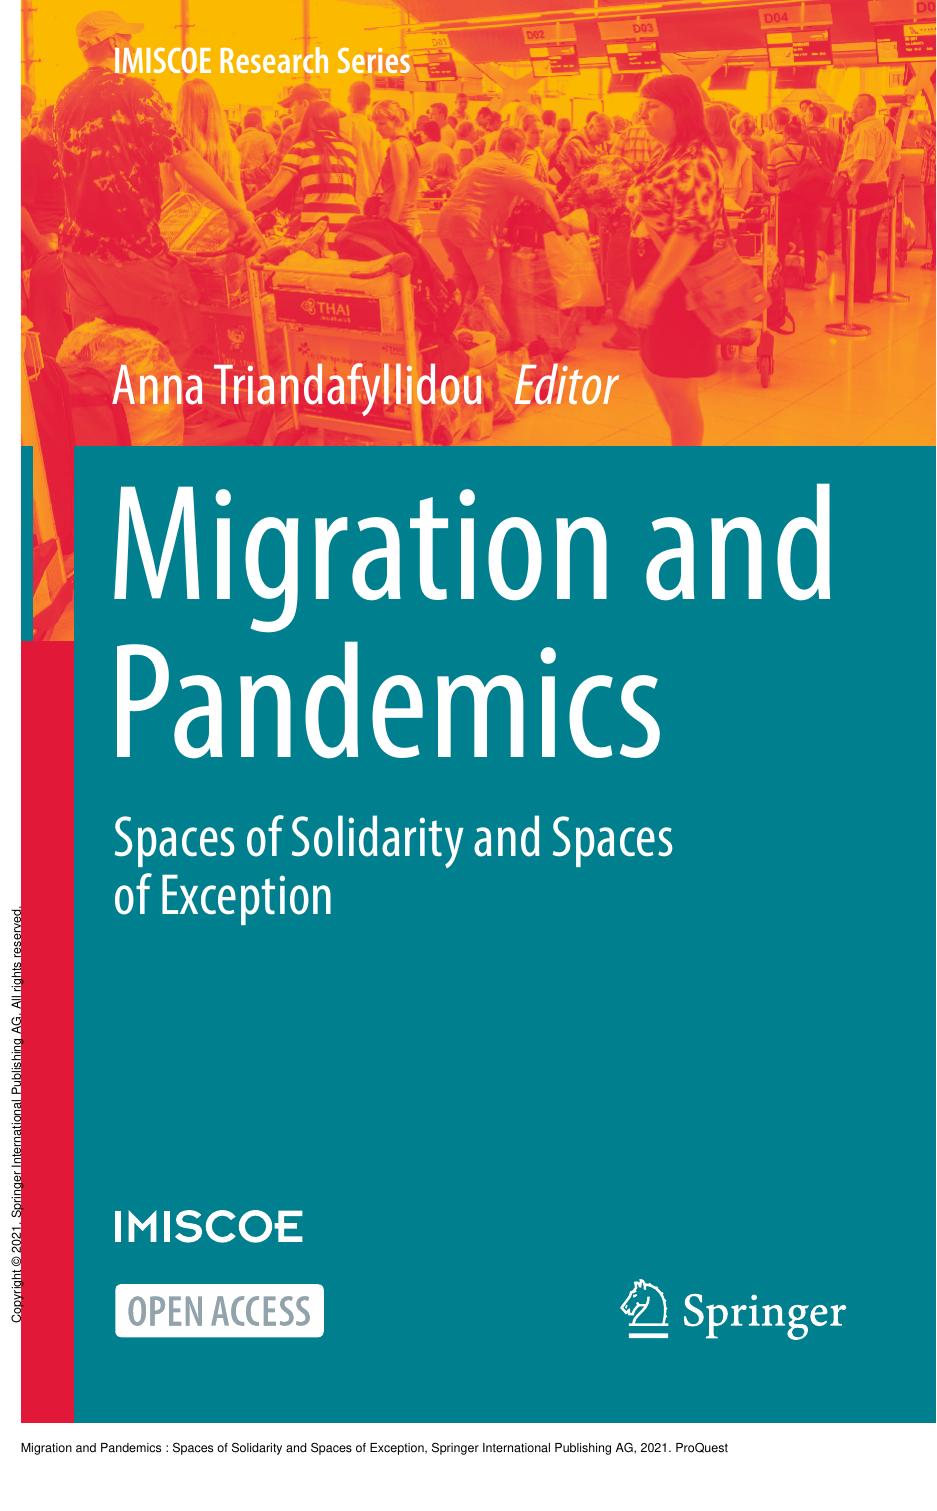 Migration and Pandemics : Spaces of Solidarity and Spaces of Exception by Anna Triandafyllidou